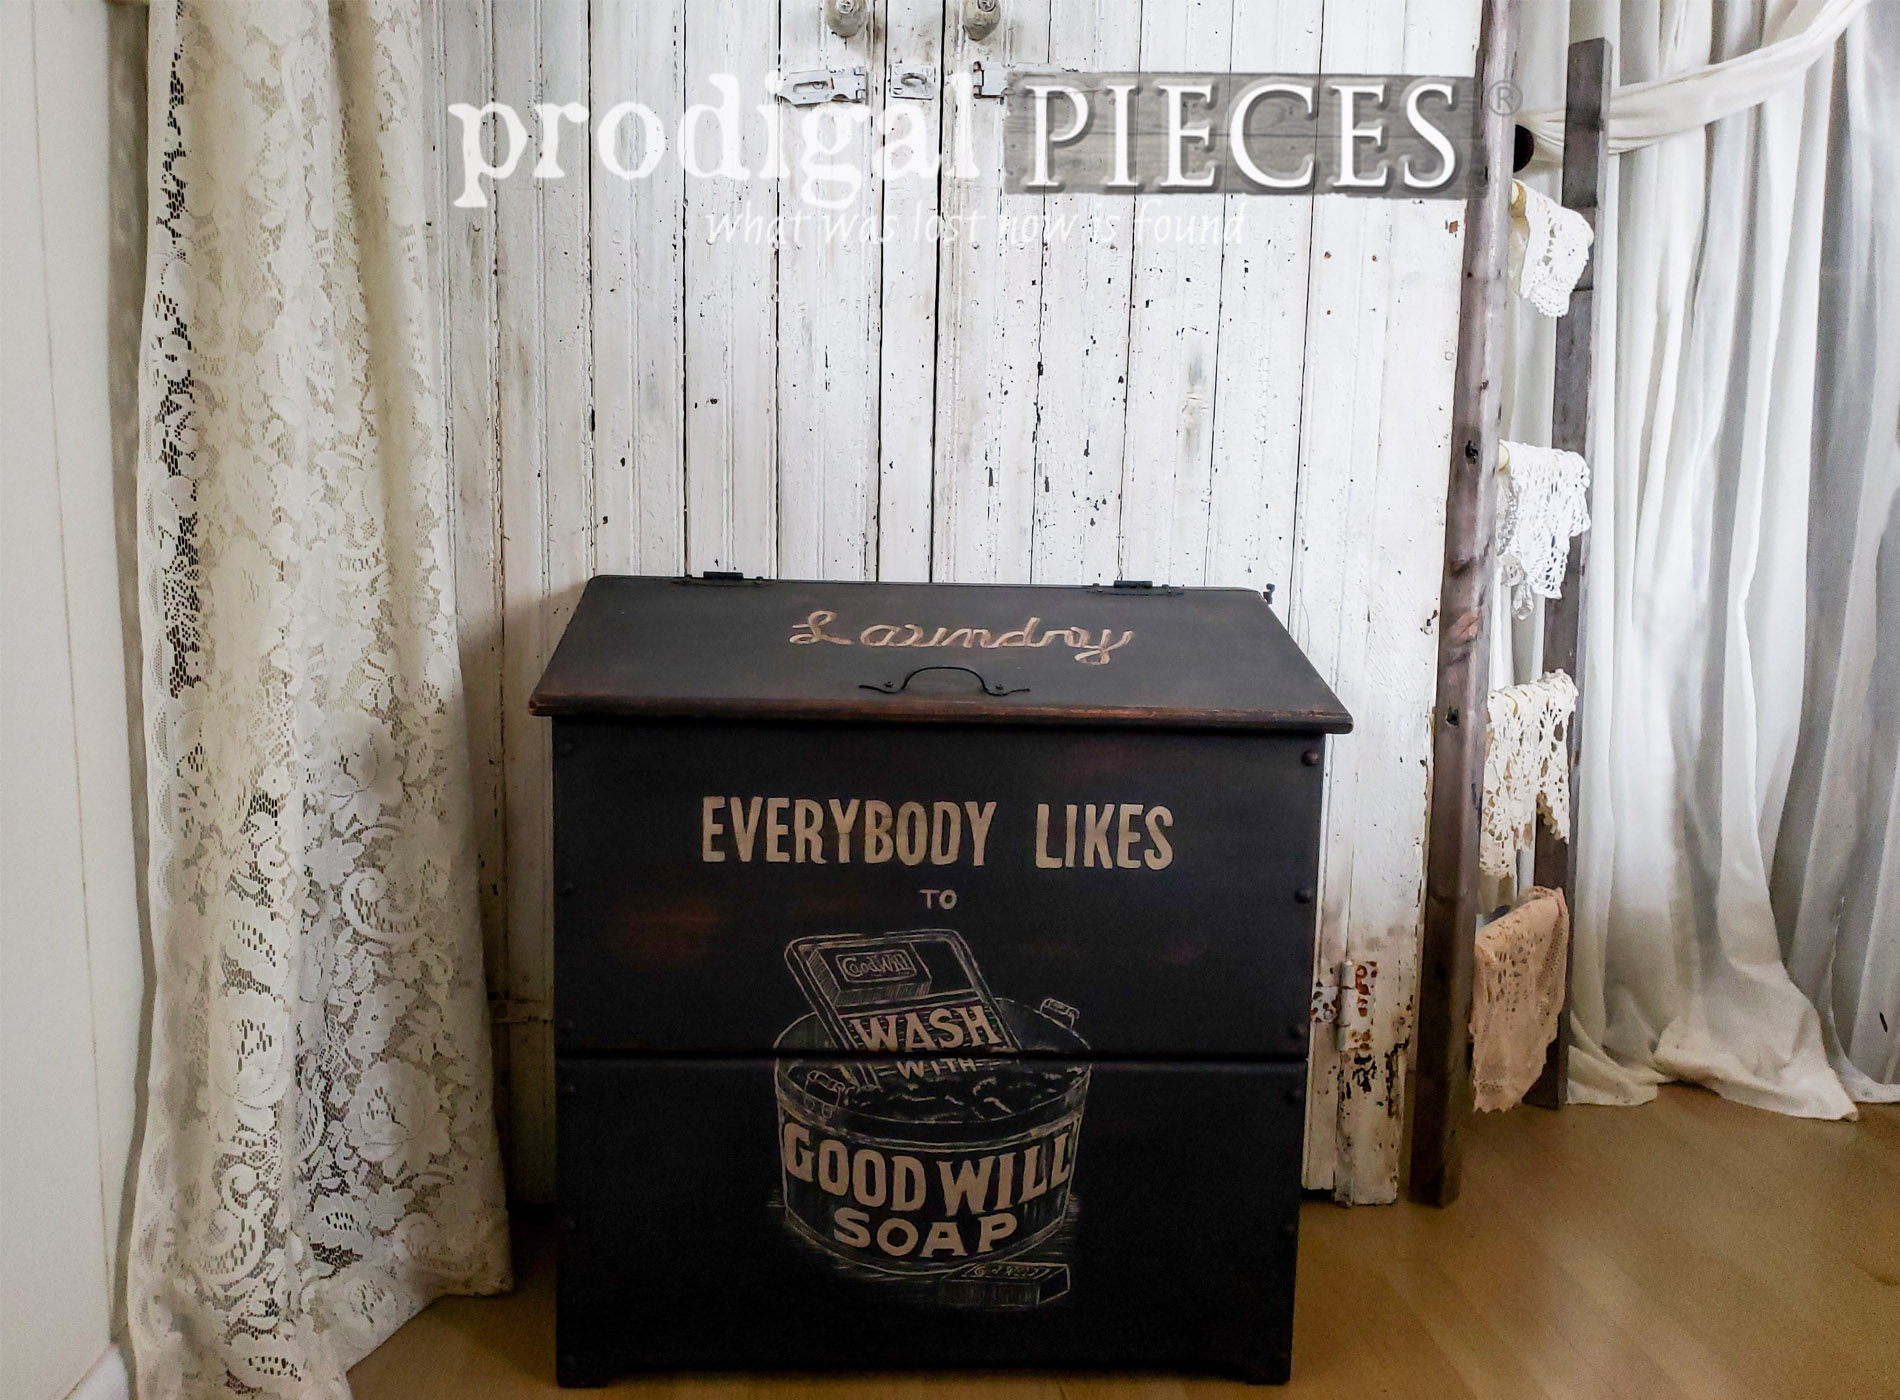 Featured Farmhouse Laundry Bin with Hand-Painted Typography by Larissa of Prodigal Pieces | prodigalpieces.com